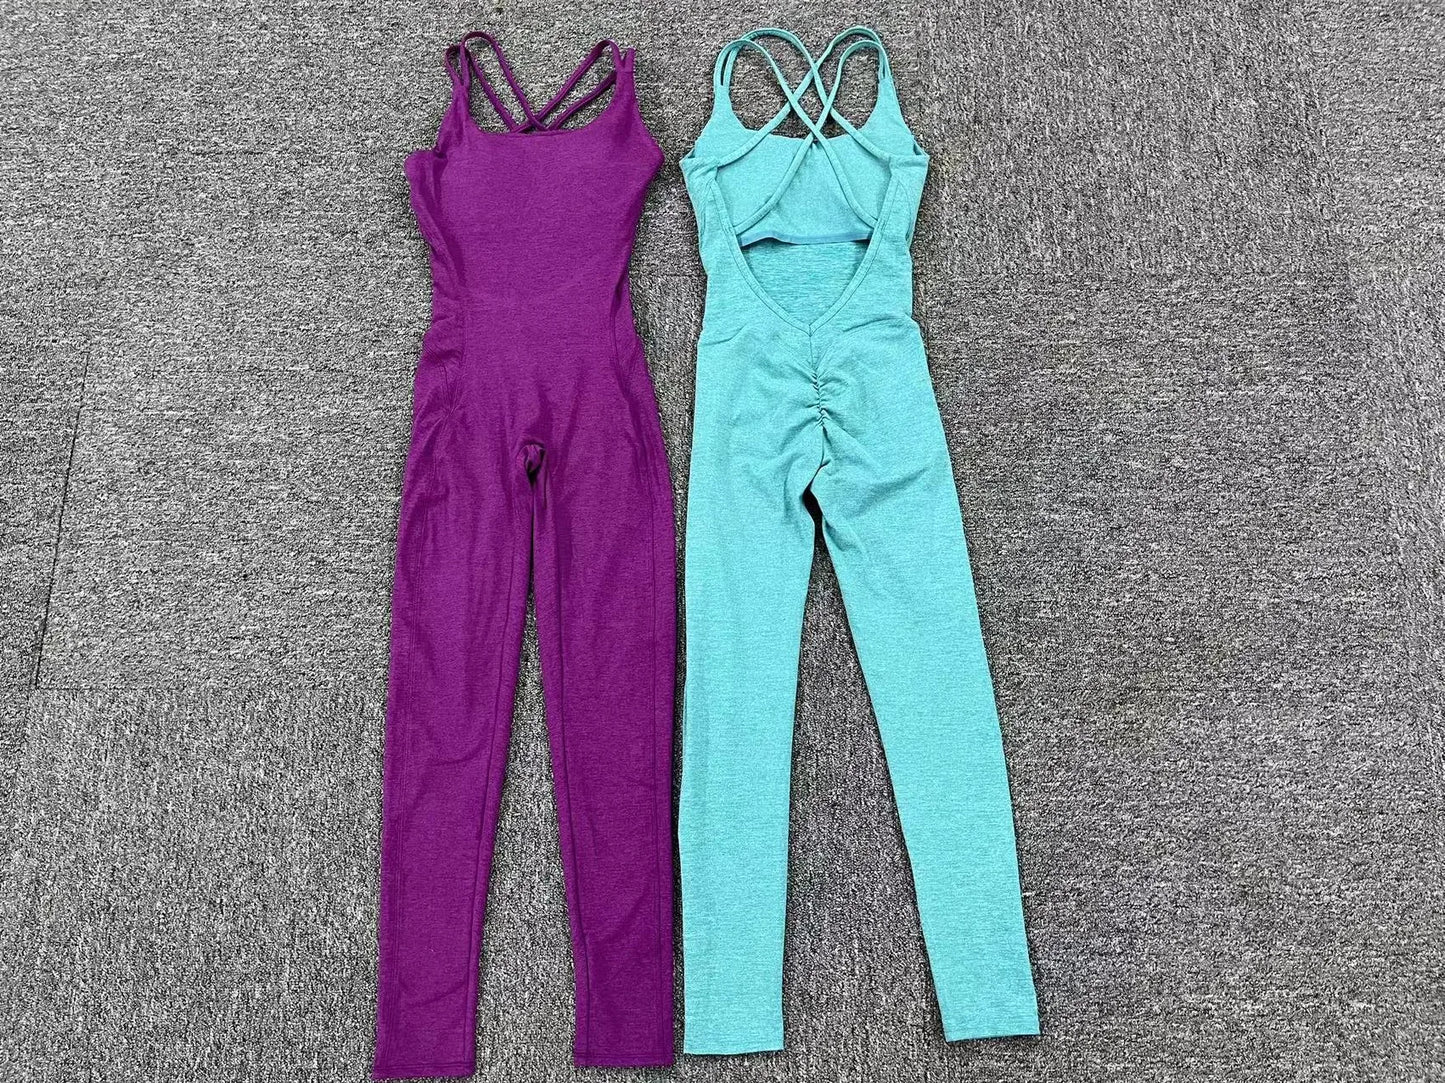 One Piece Backless Bodycon Scrunch Jumpsuit Women Dance Fitness Overalls Push Up Sleeveless Yoga Sport Jump Suit The Clothing Company Sydney